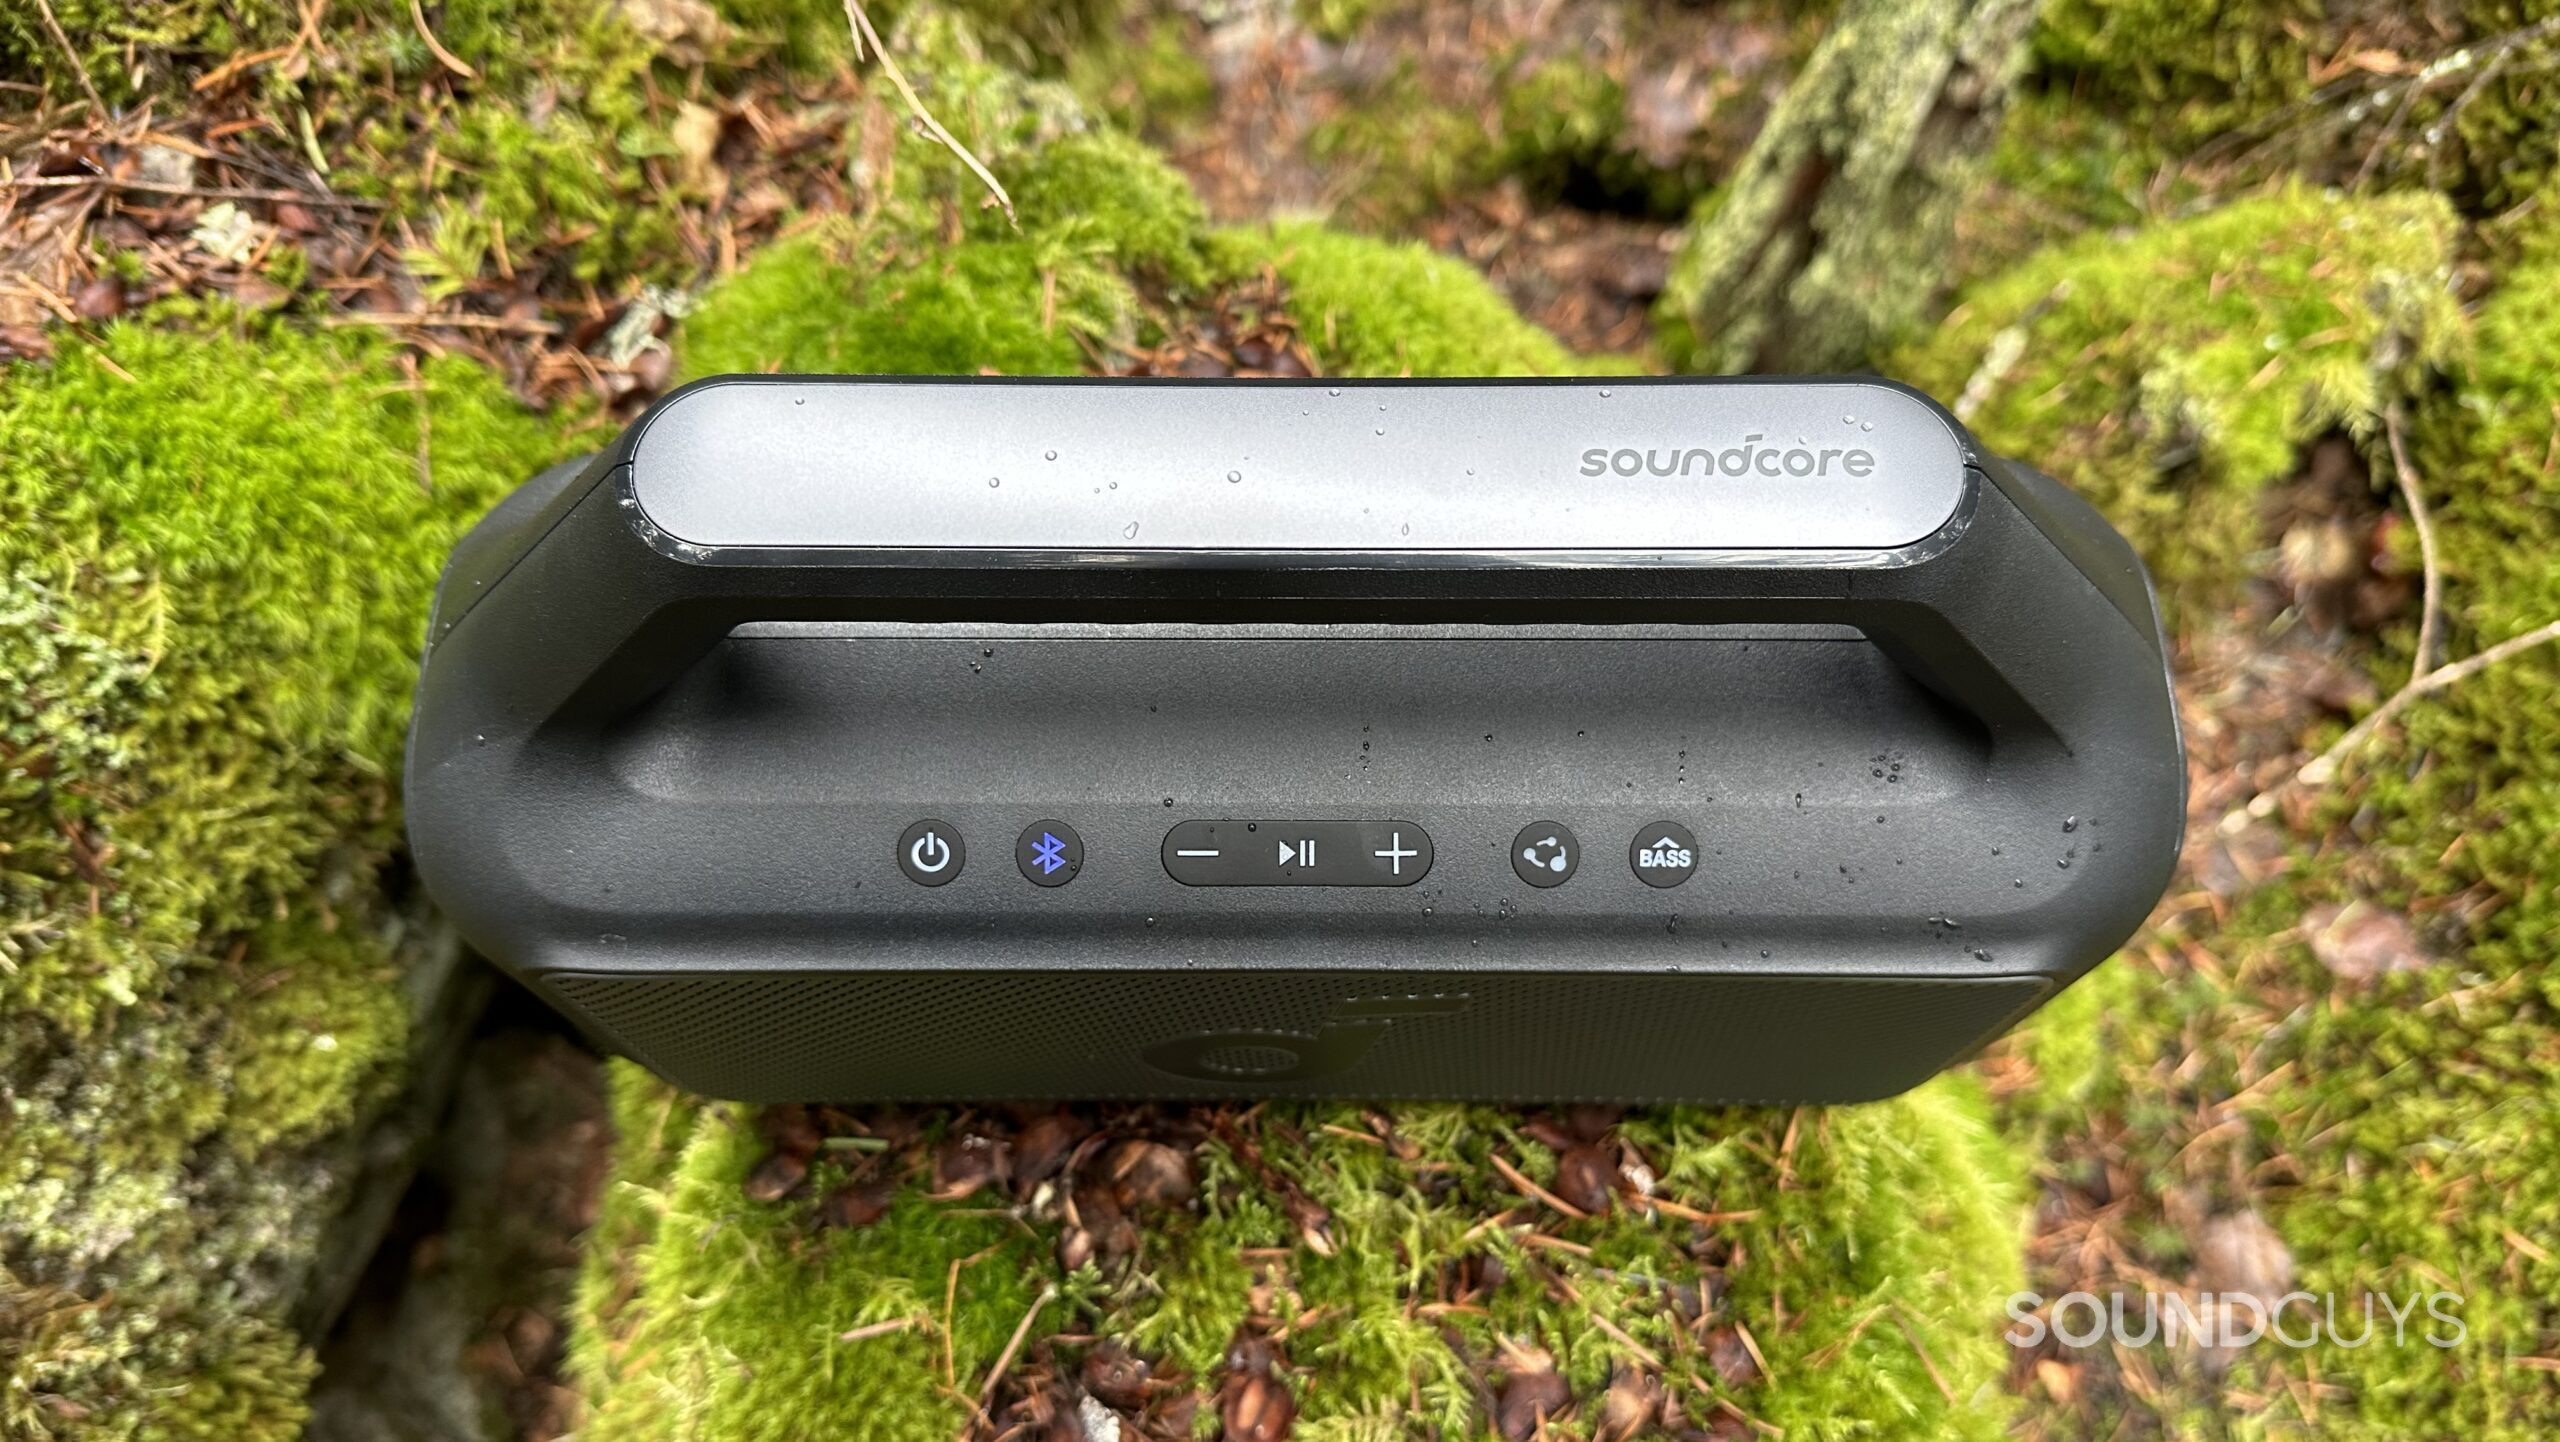 Top view of the Anker Soundcore Boom 2 handle and controls